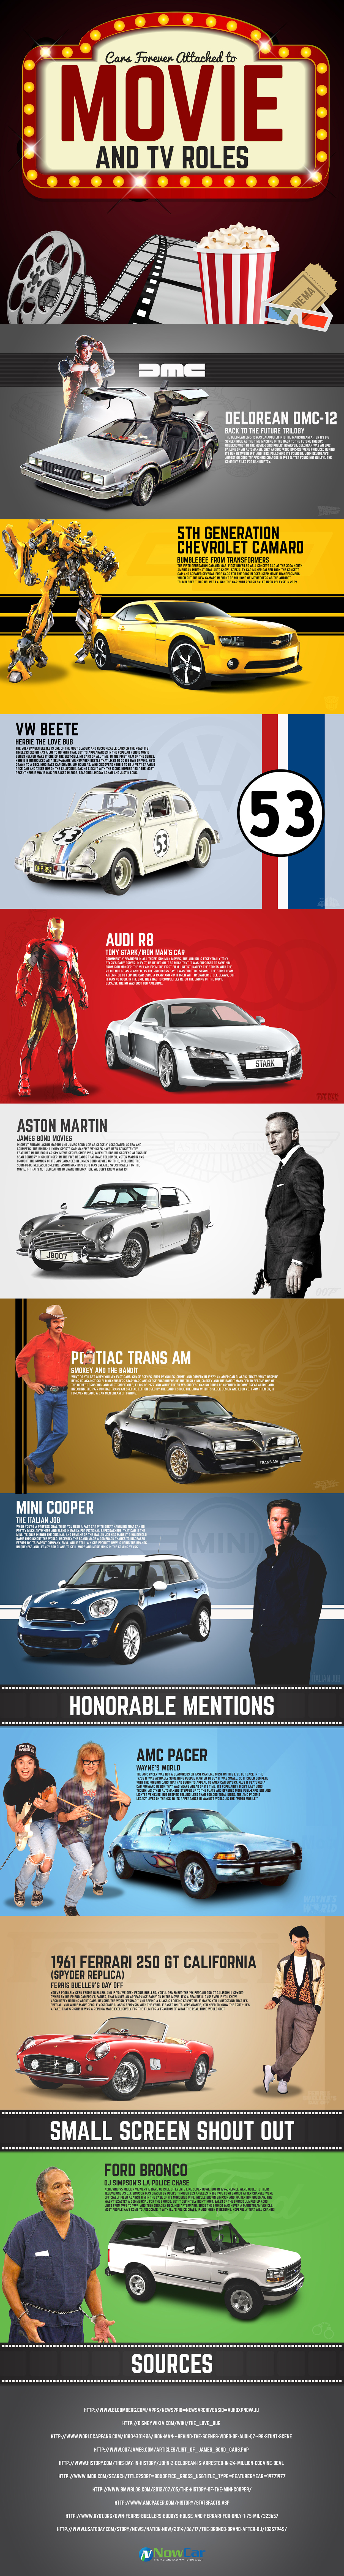 10 Cars Forever Attached to Movie Roles